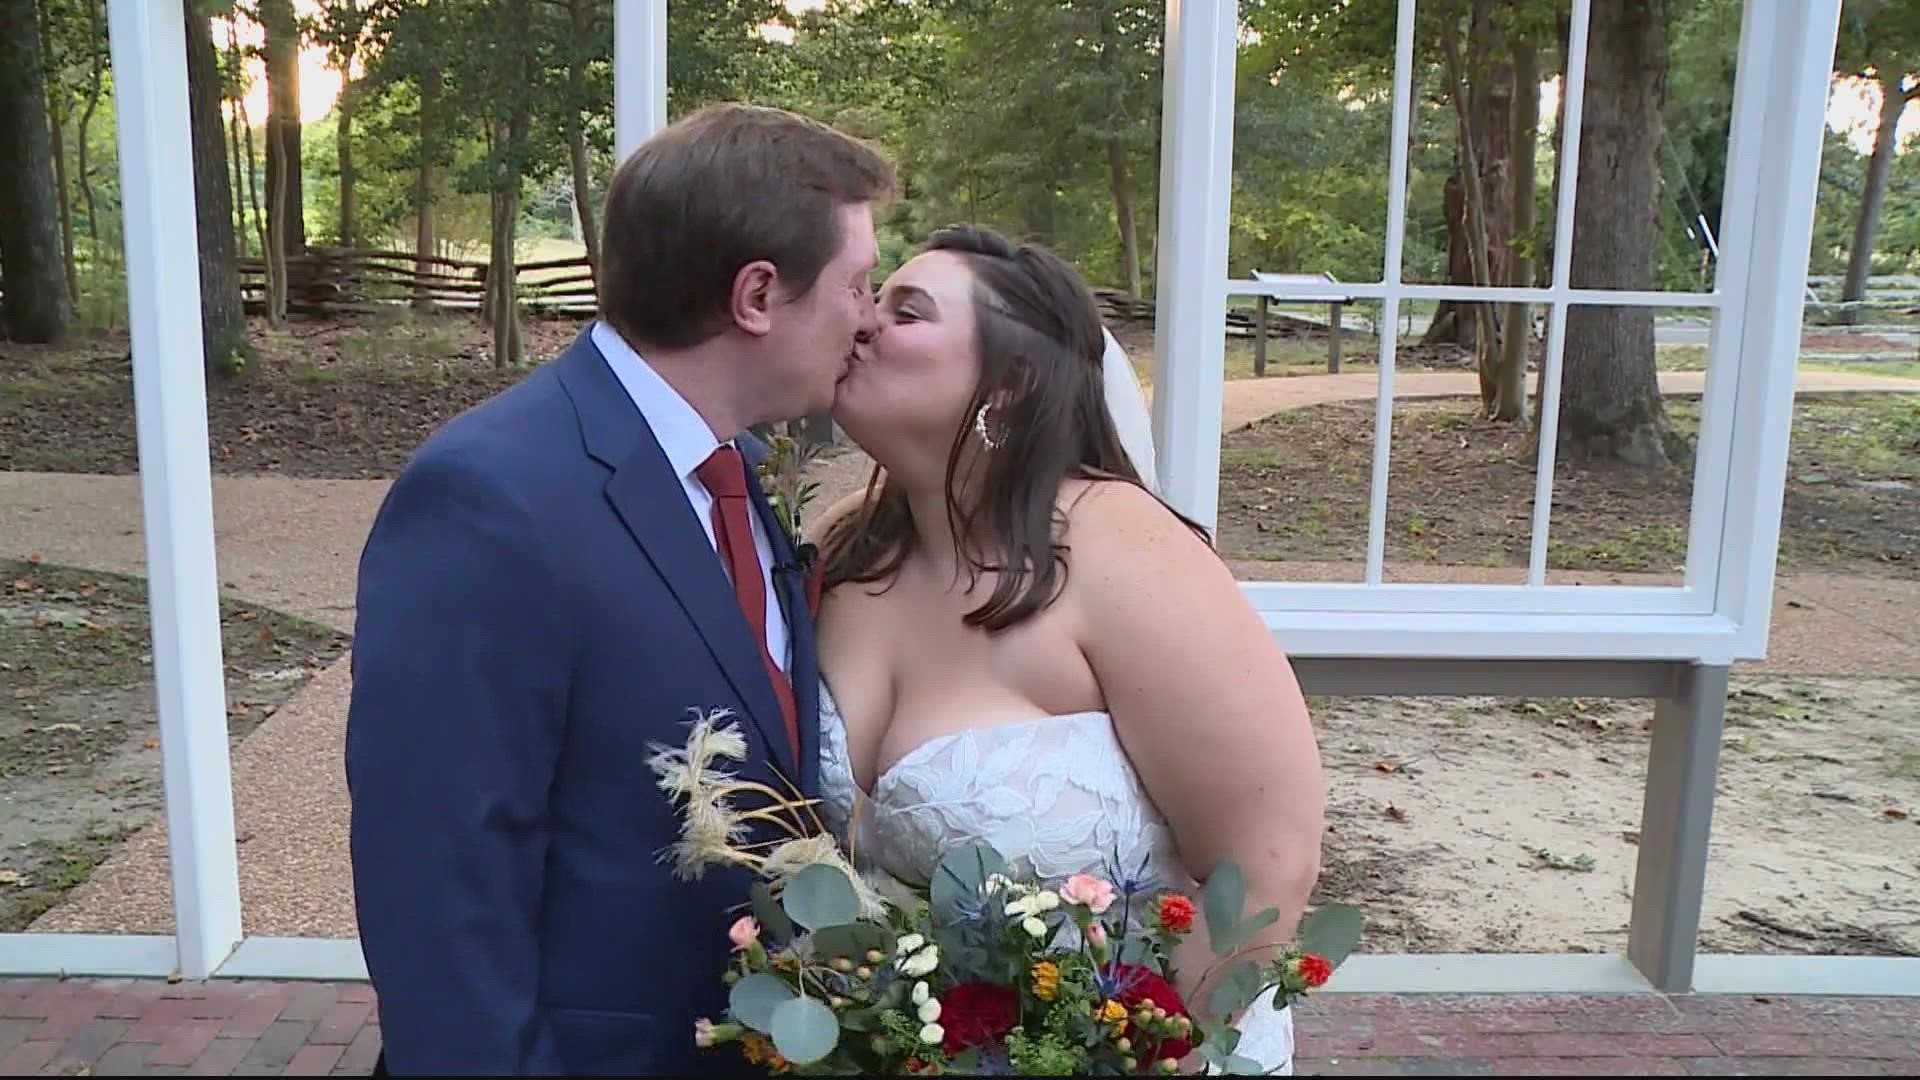 One couple in Virginia didn't let the storm rain on their wedding day. How they pulled off "I Do's" before Ian hit.